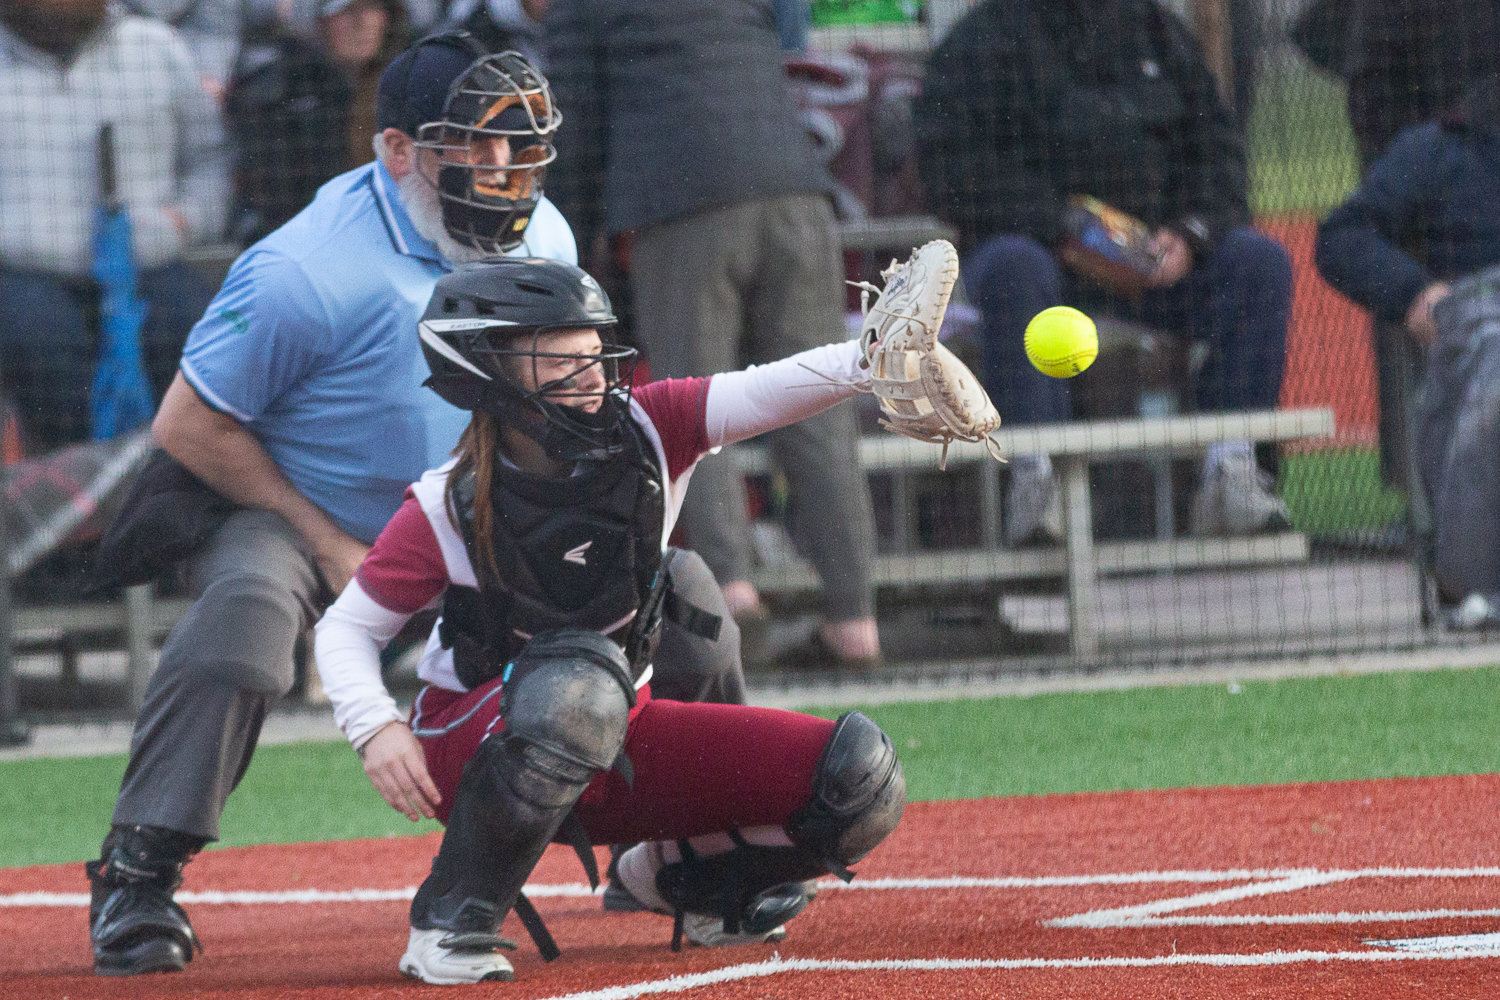 Rachel Gray catches a pitch during W.F. West's 3-2 win over Tumwater on March 22 at Rec Park.